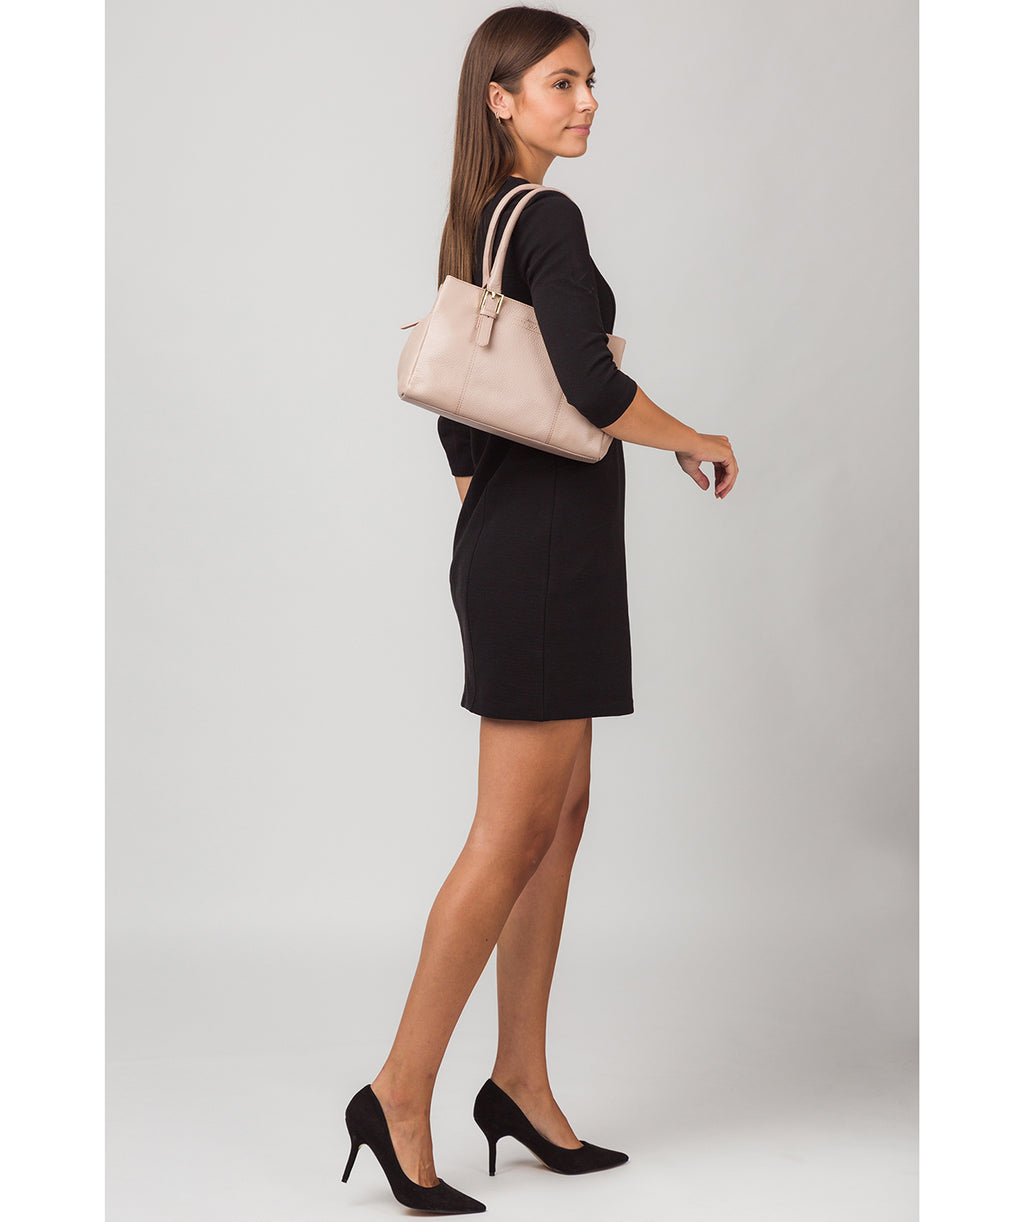 Pink Leather Handbag 'Astley' by Pure Luxuries – Pure Luxuries London